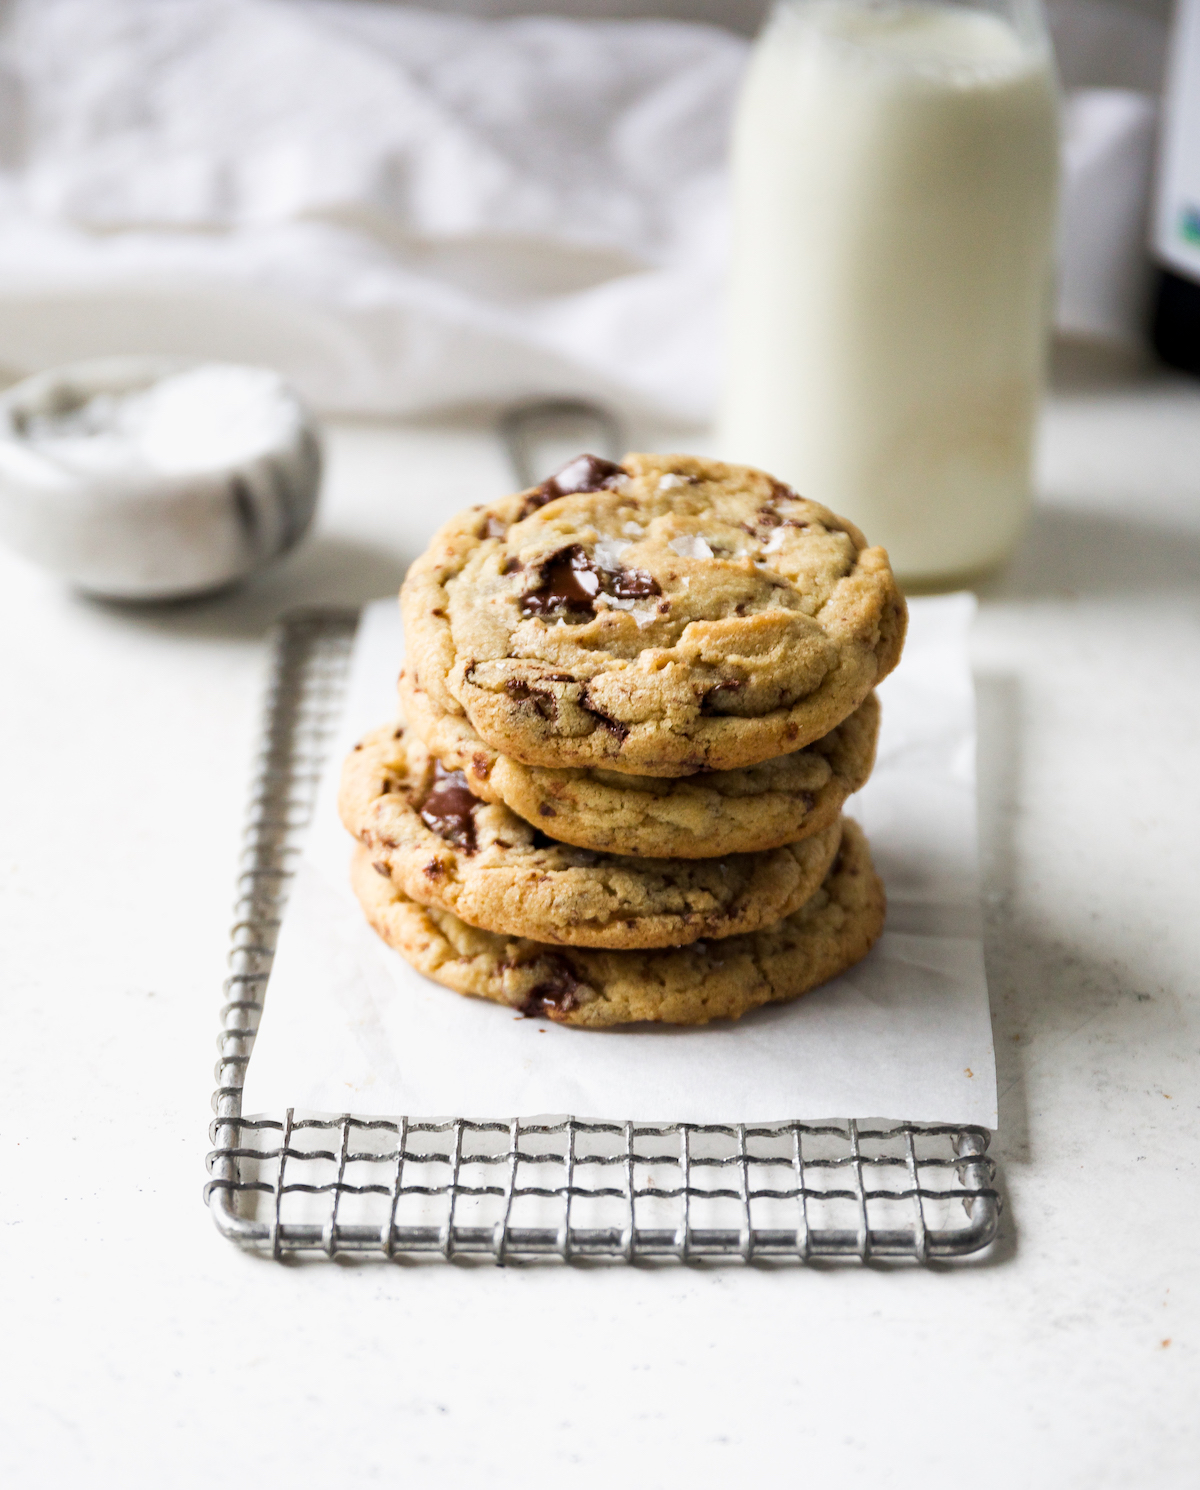 A stack of cookies with a glass jar of milk in the background.